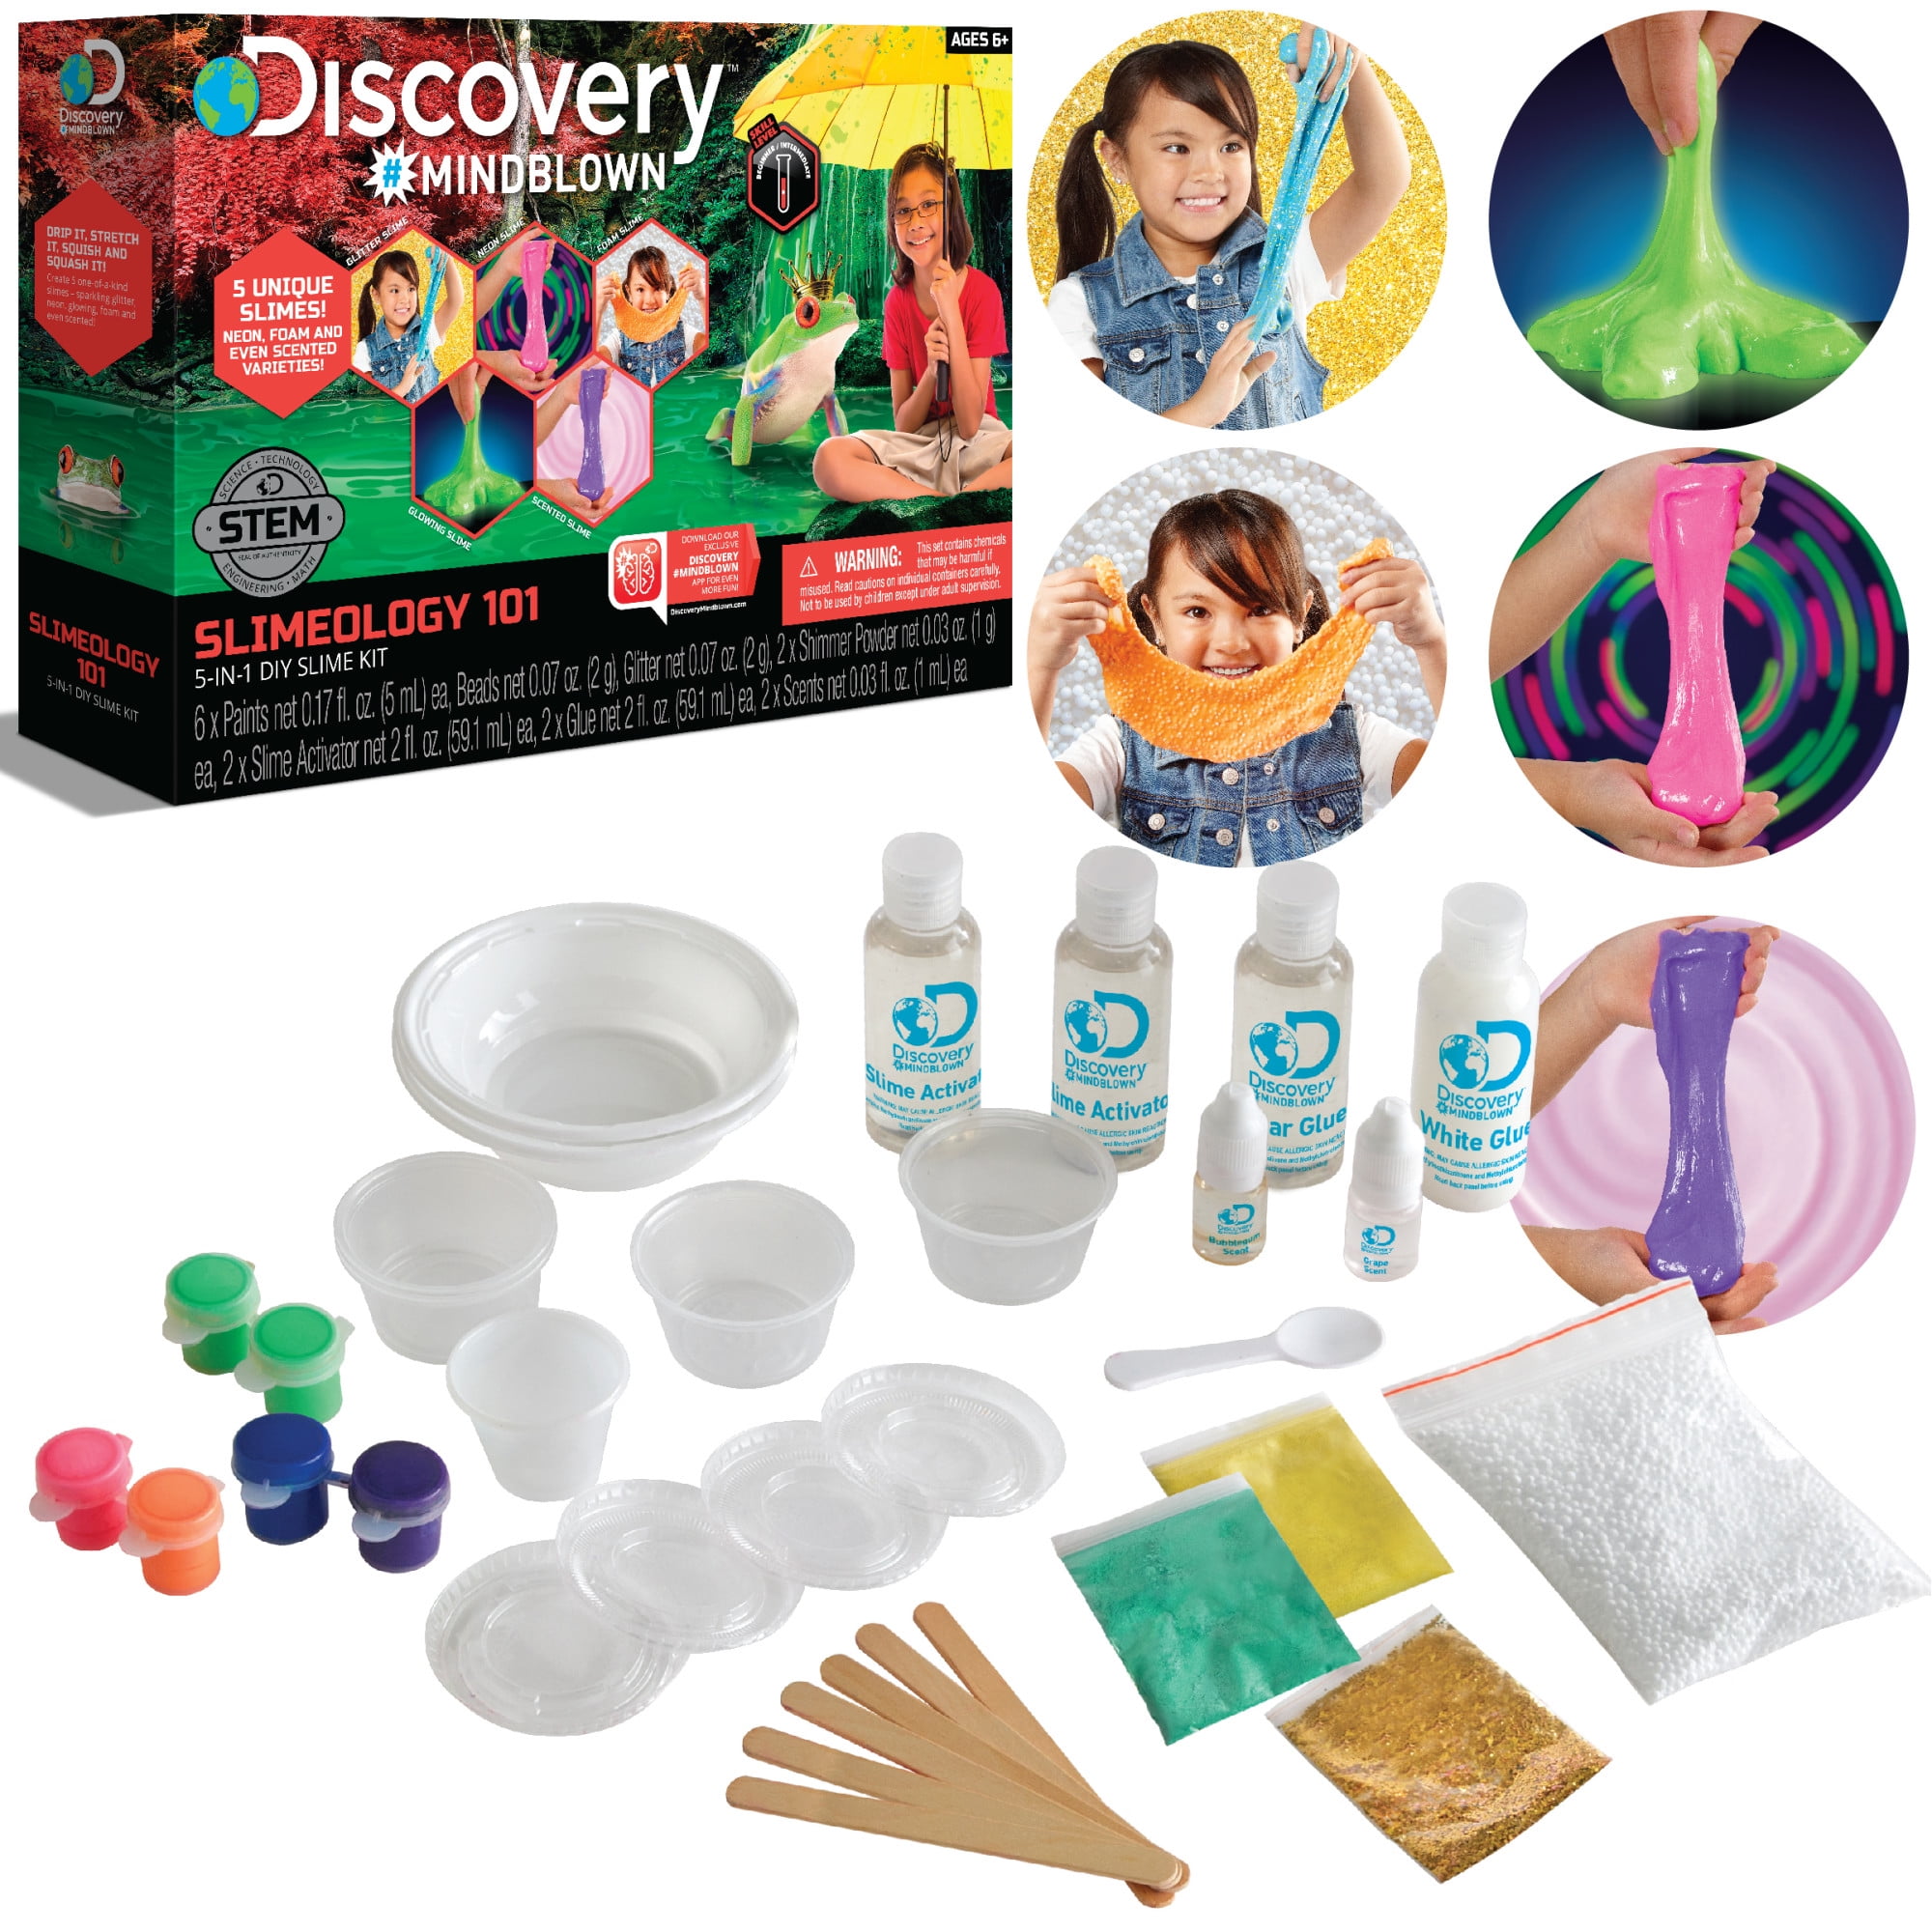  Discovering DIY Slime Kit for Girls and Boys - 52